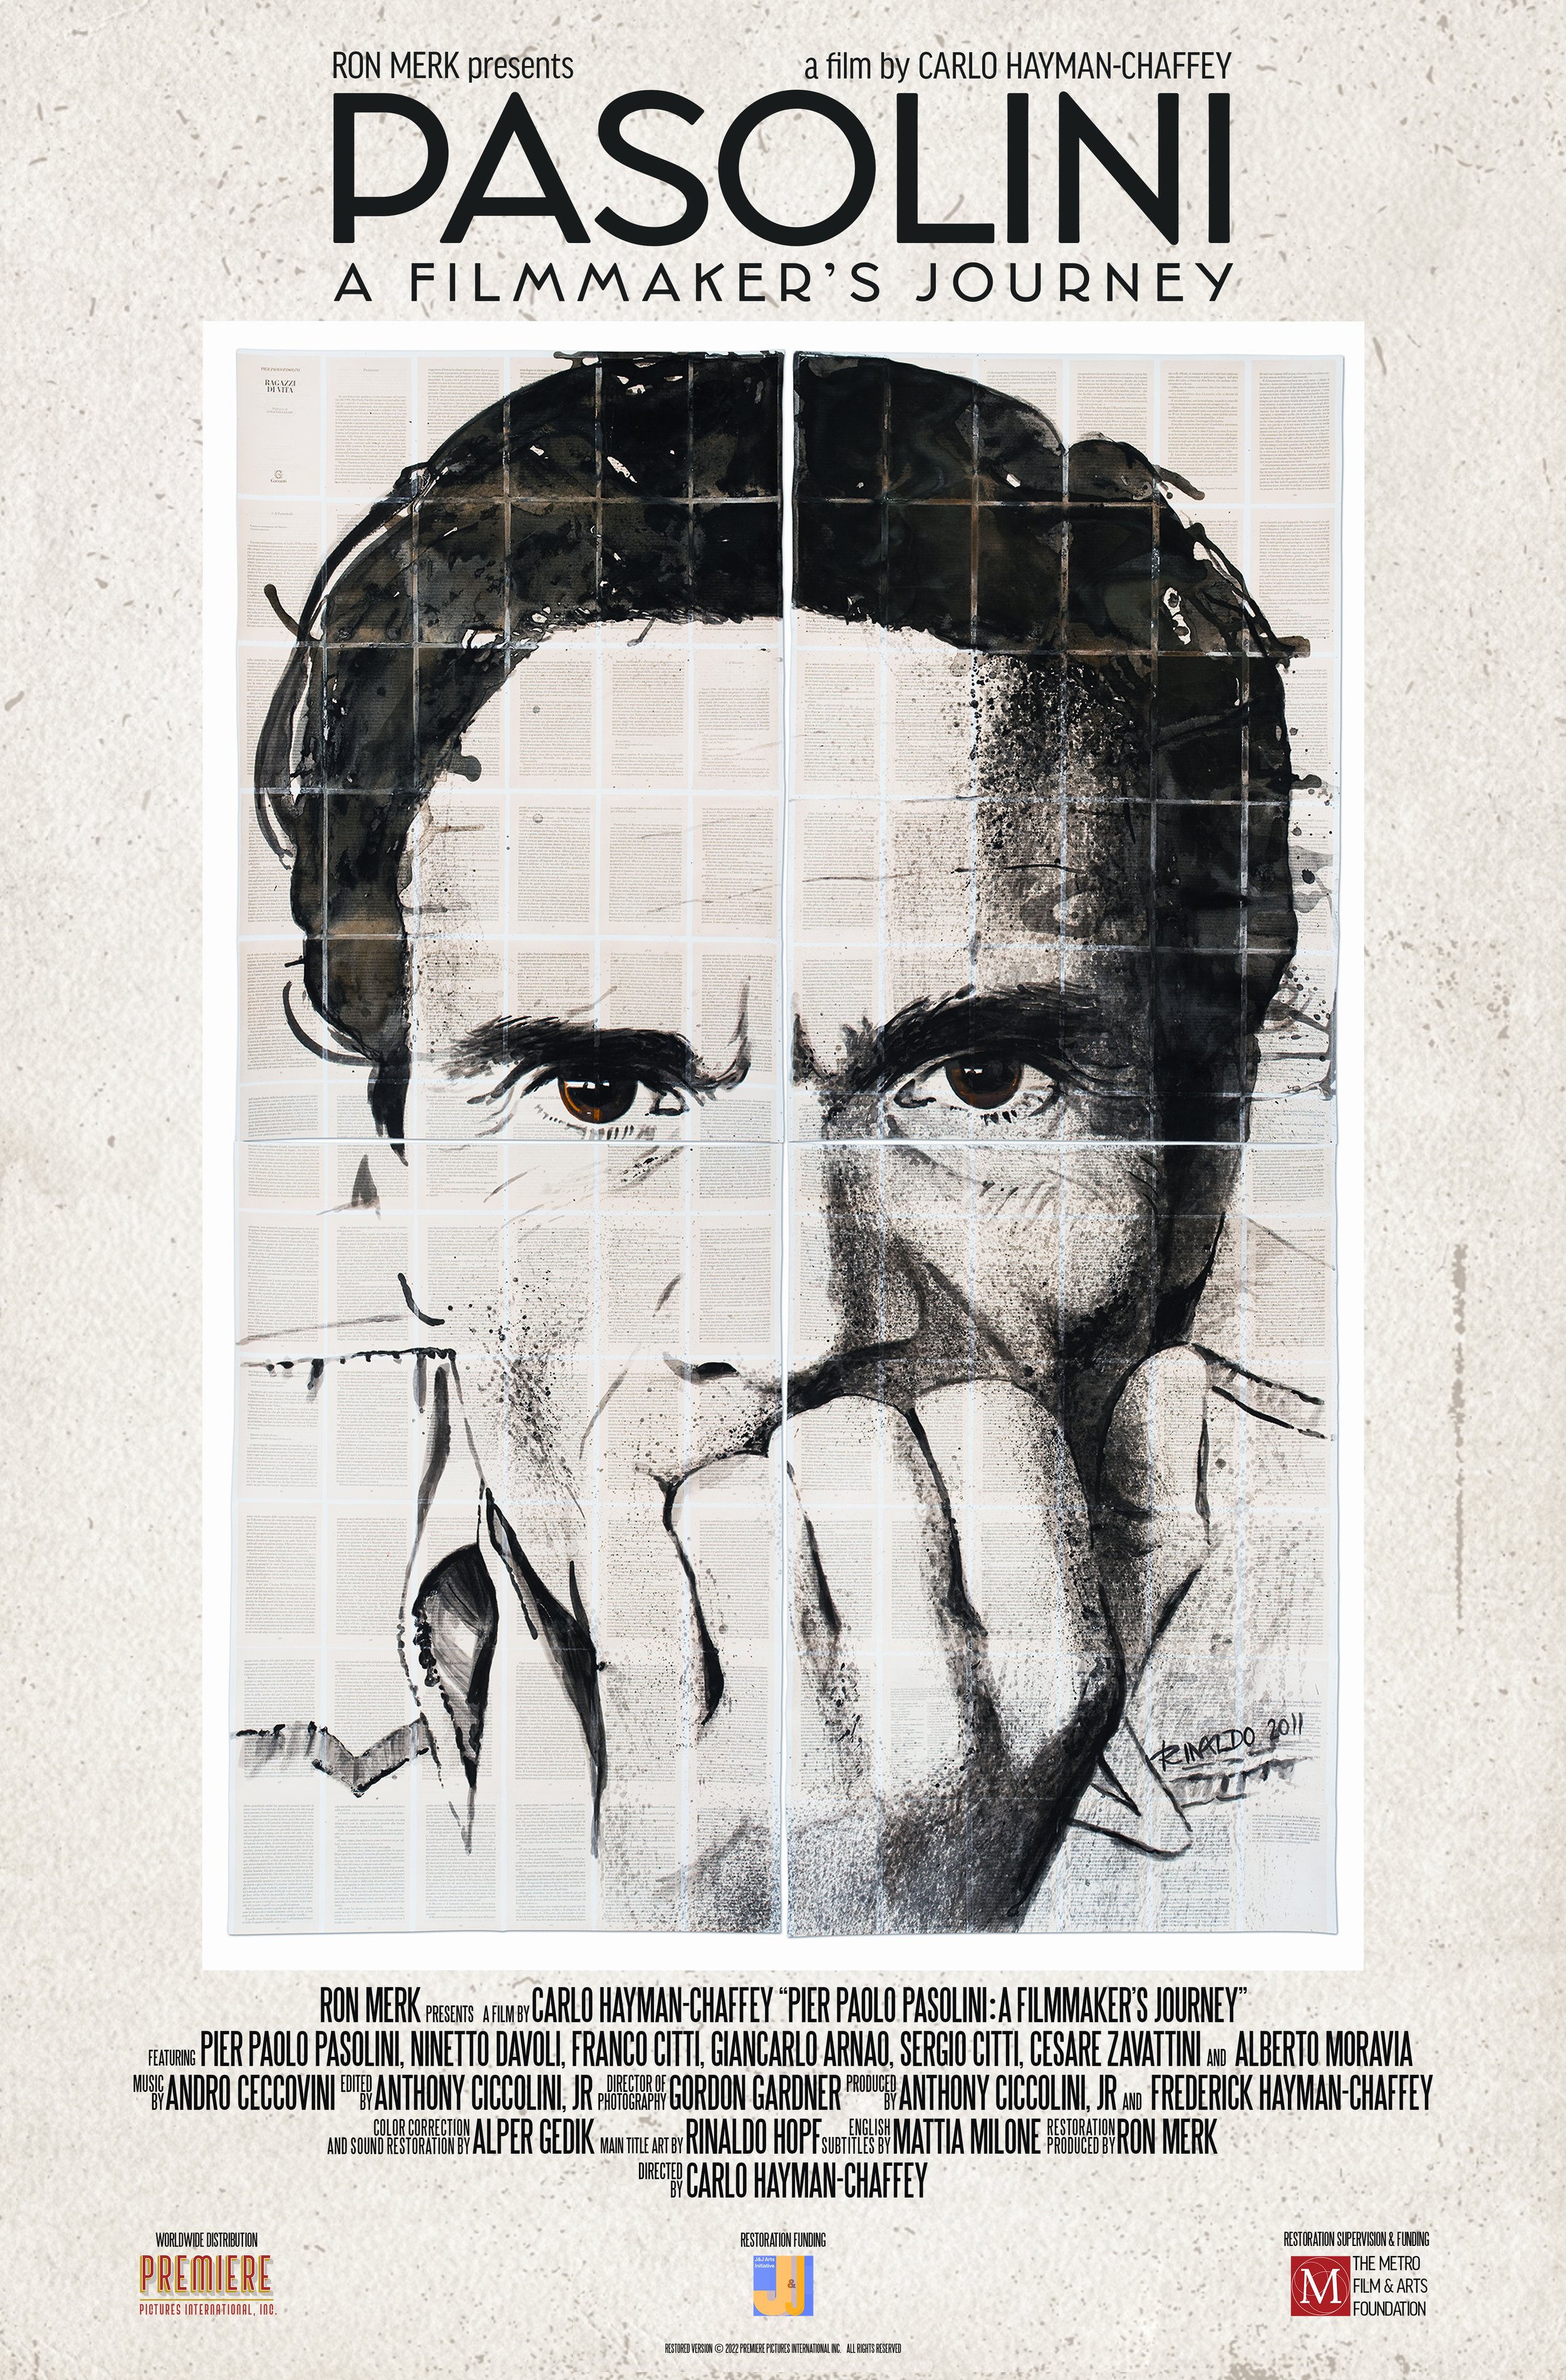 MY ARTWORK AS MAIN IMAGE FOR THE NEWLY RESTORED DOCUMENTARY ON PASOLINI